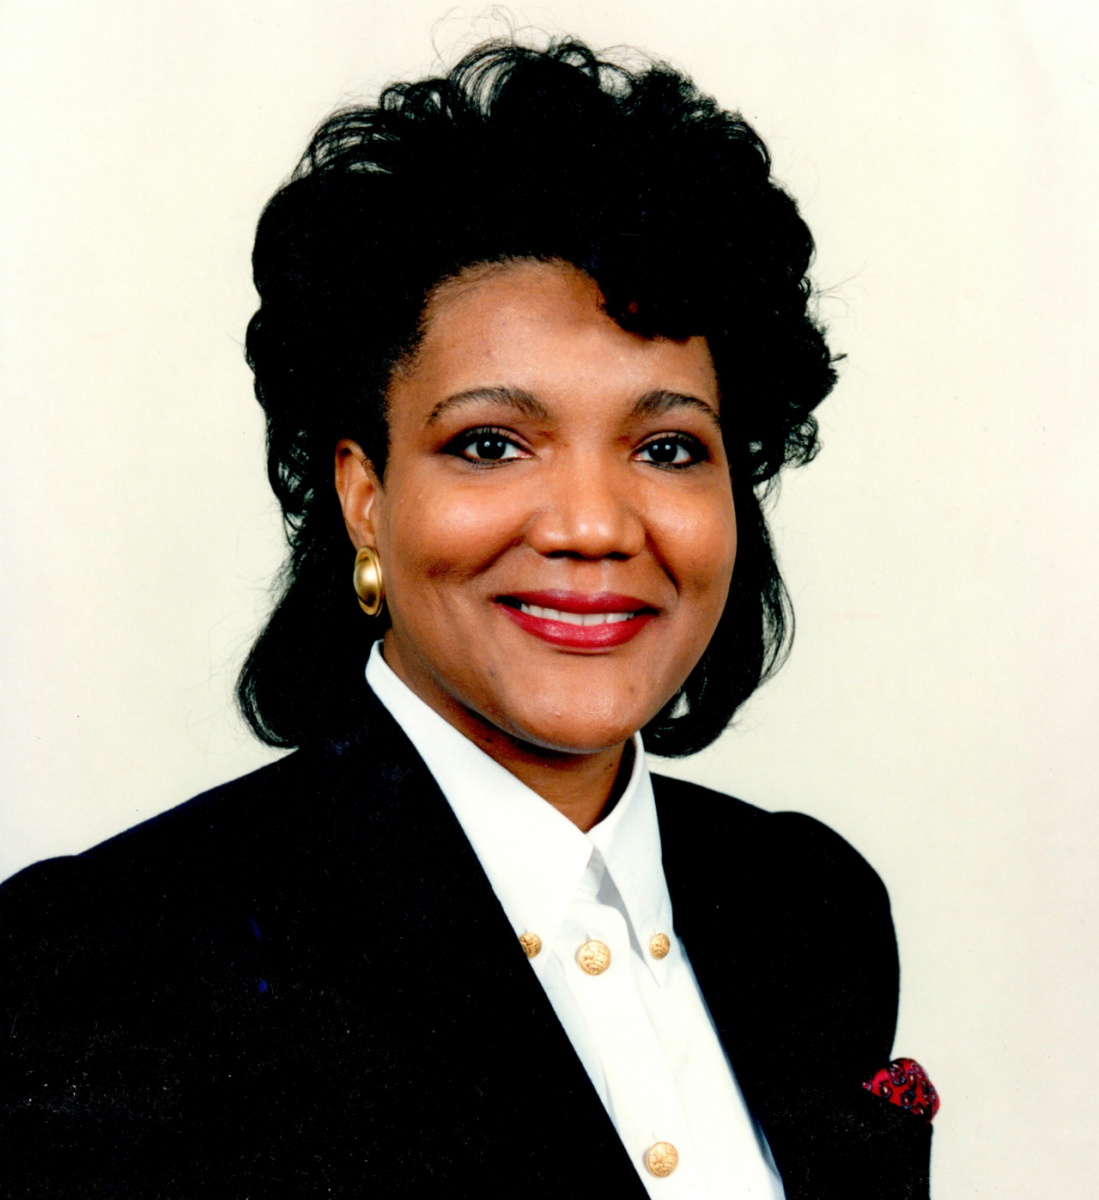 Photo of Cynthia Quaterman -- an African American woman wearing a business suit and smiling at the camera.